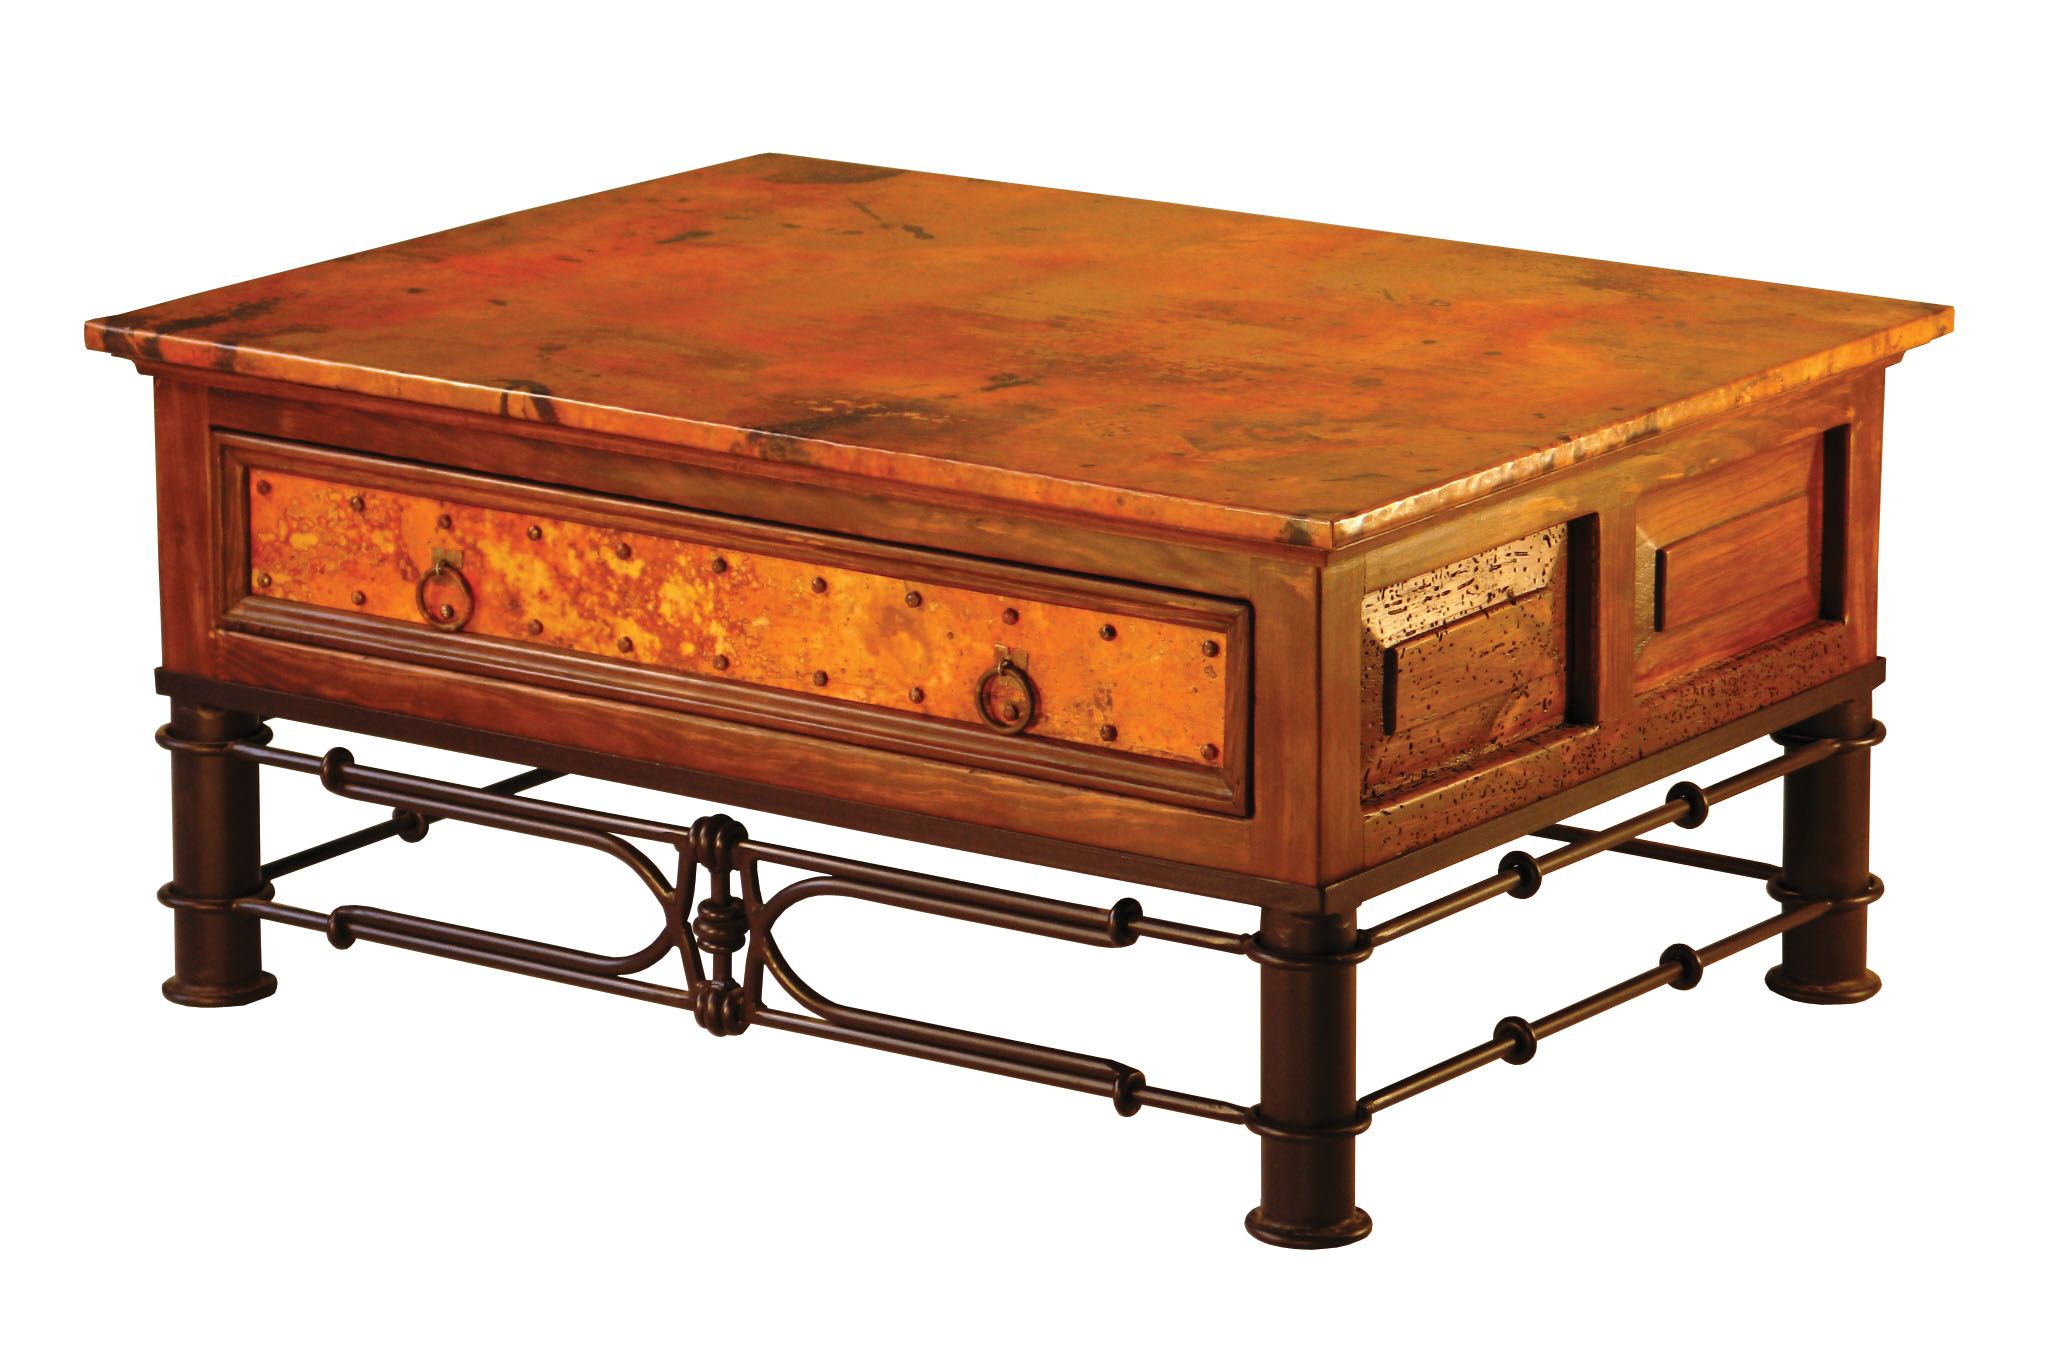 1 Drawer Coffee Table W/ Copper/pablo Base | Mr Vallarta's Throughout Metal 1 Shelf Coffee Tables (View 7 of 20)